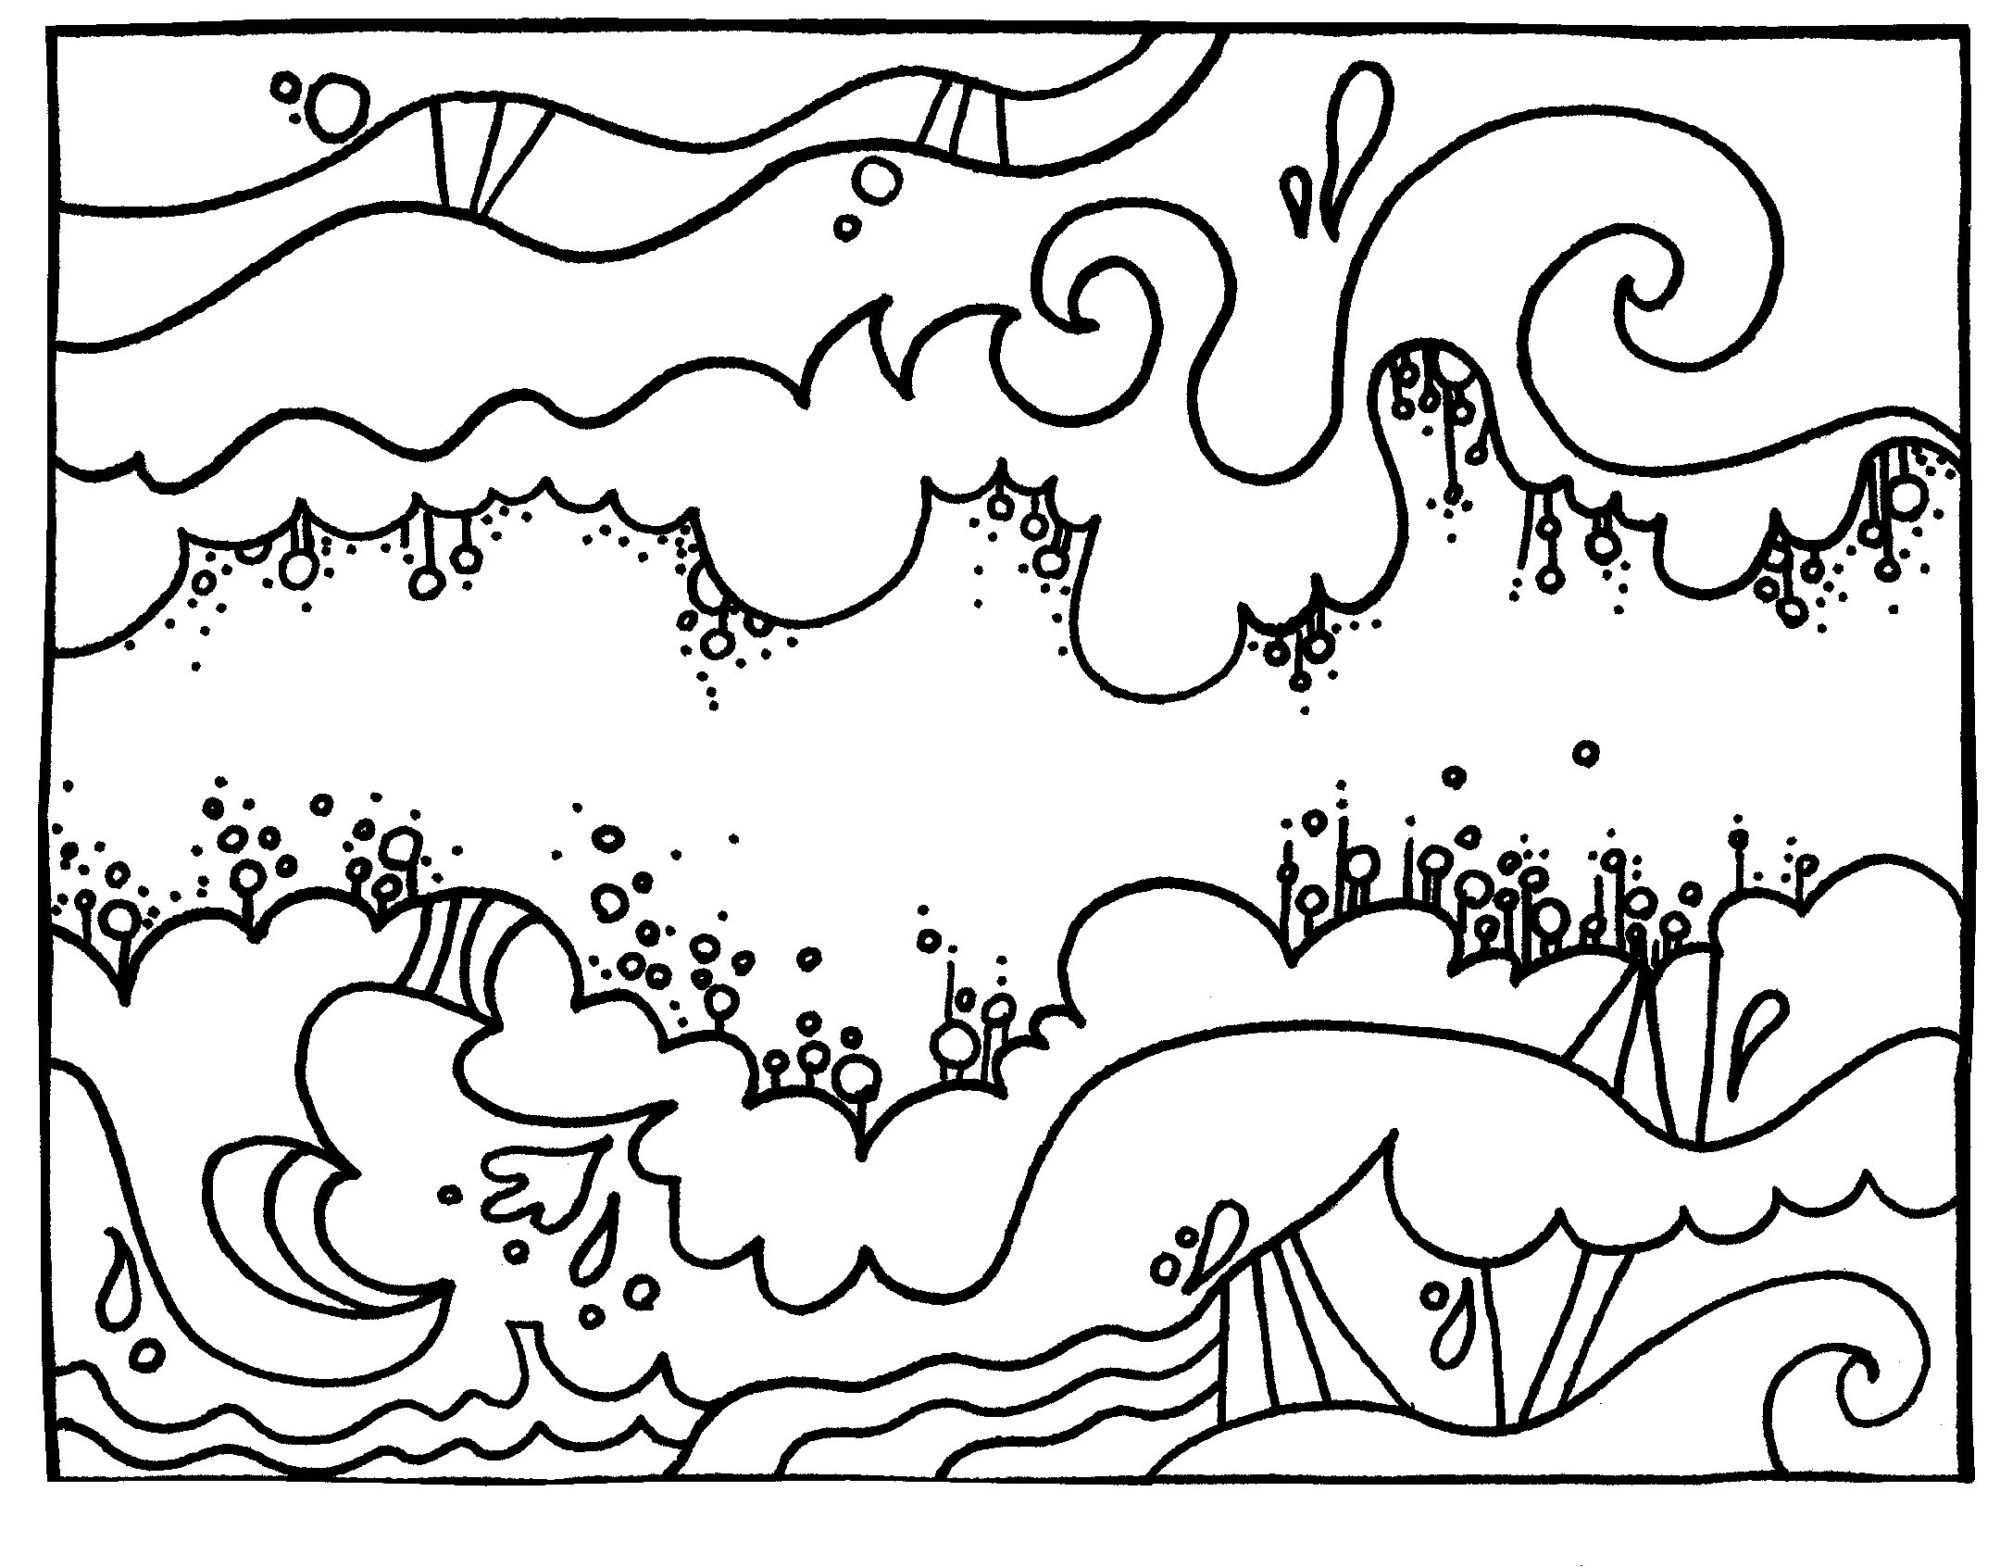 god made winter coloring pages